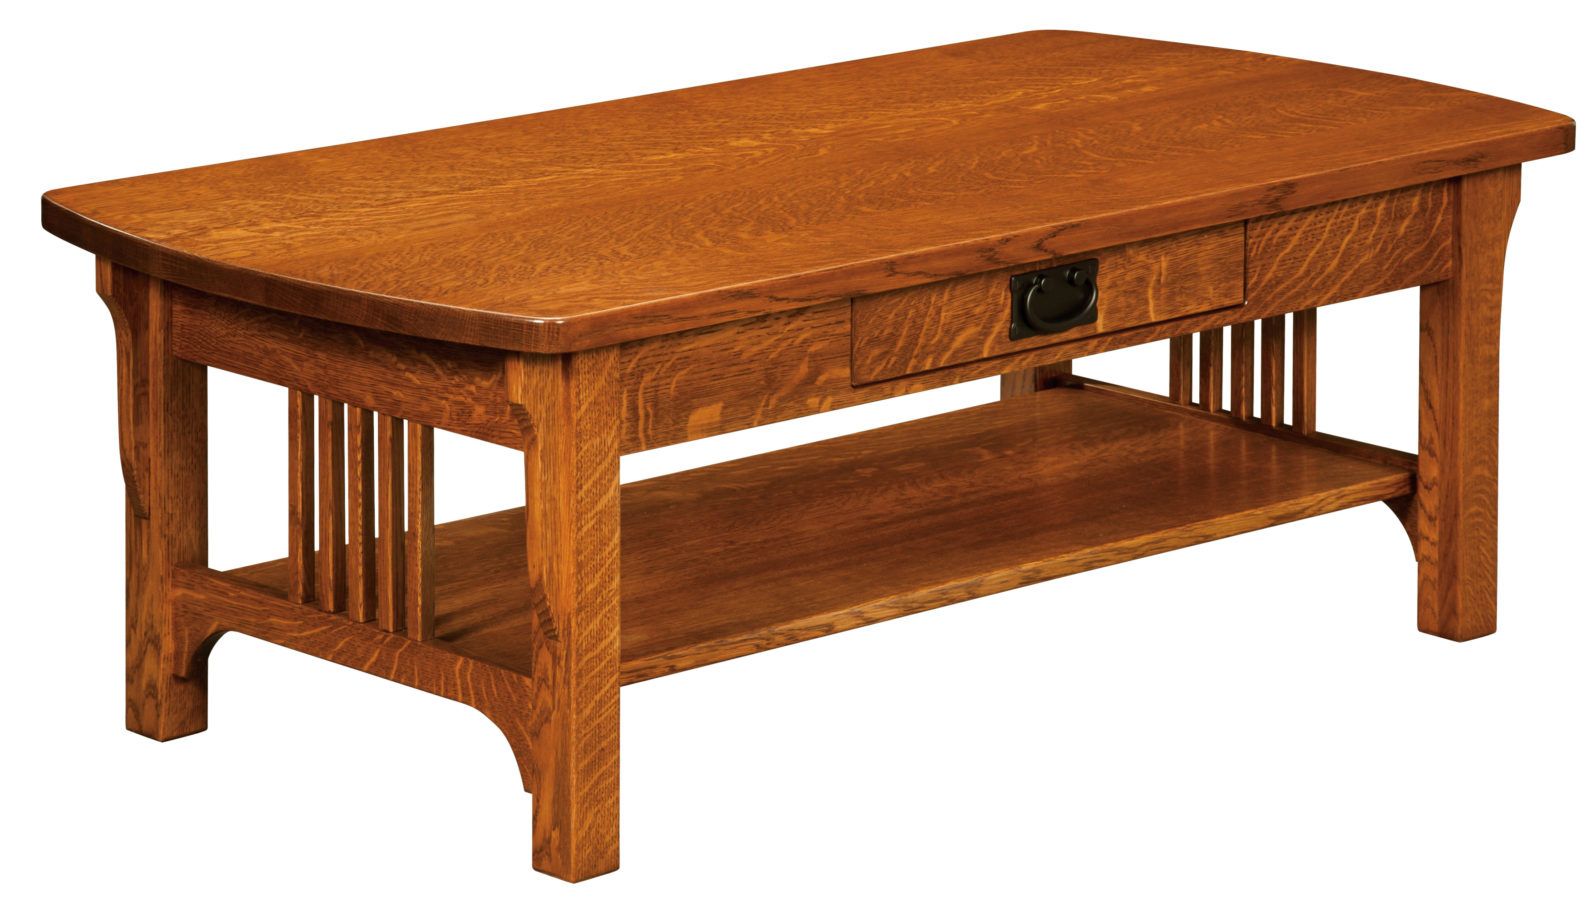 Craftsman Mission Coffee Table | Amish Solid Wood Coffee Tables Intended For Coffee Tables With Solid Legs (View 13 of 20)